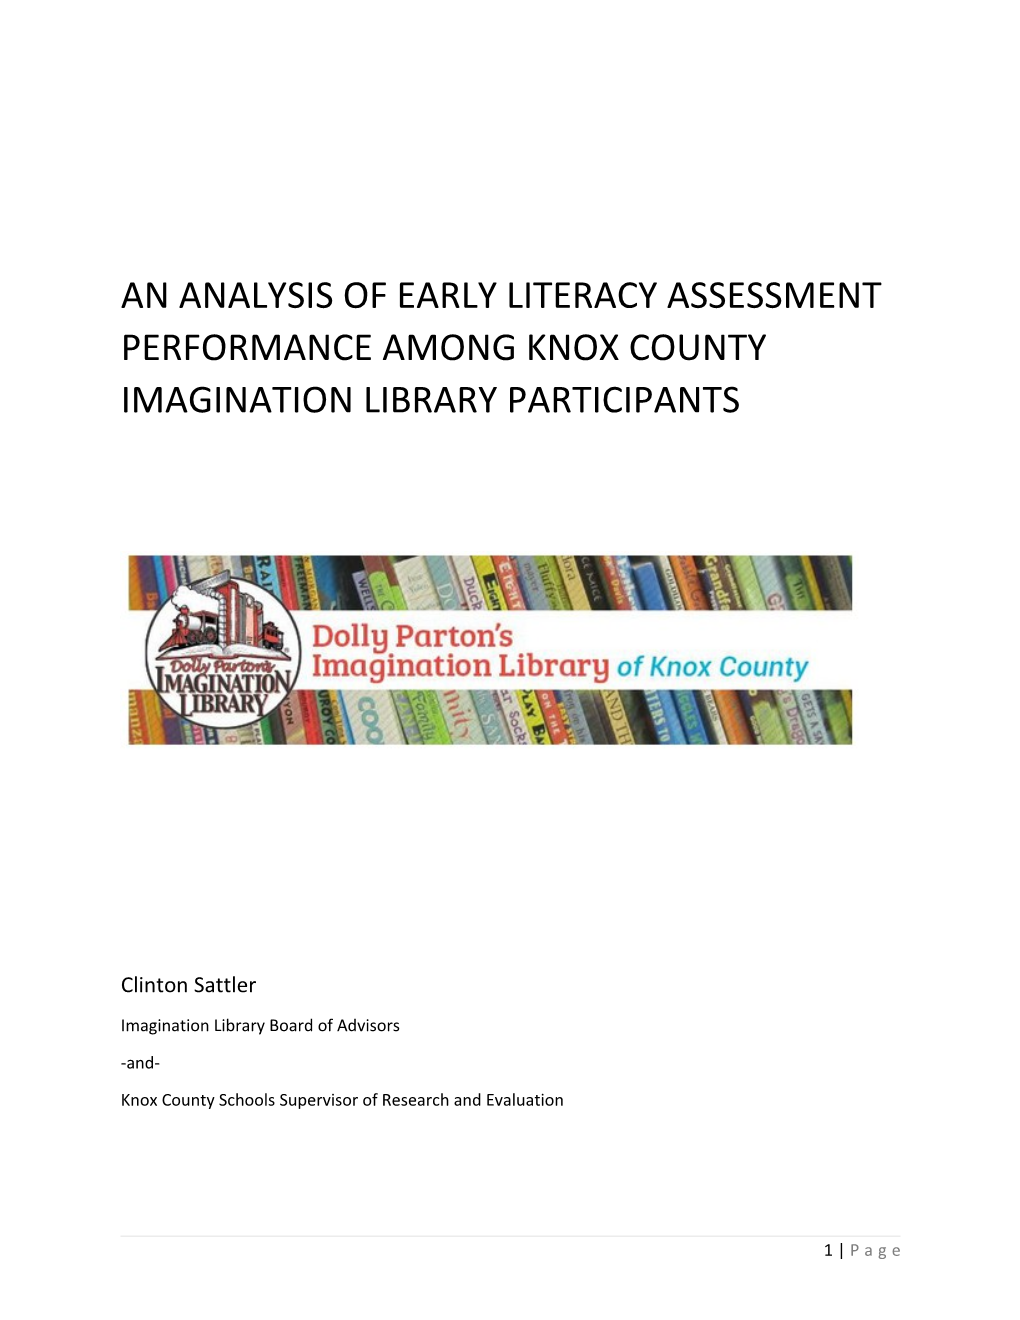 An Analysis of Early Literacy Assessment Performance Among Knox County Imagination Library